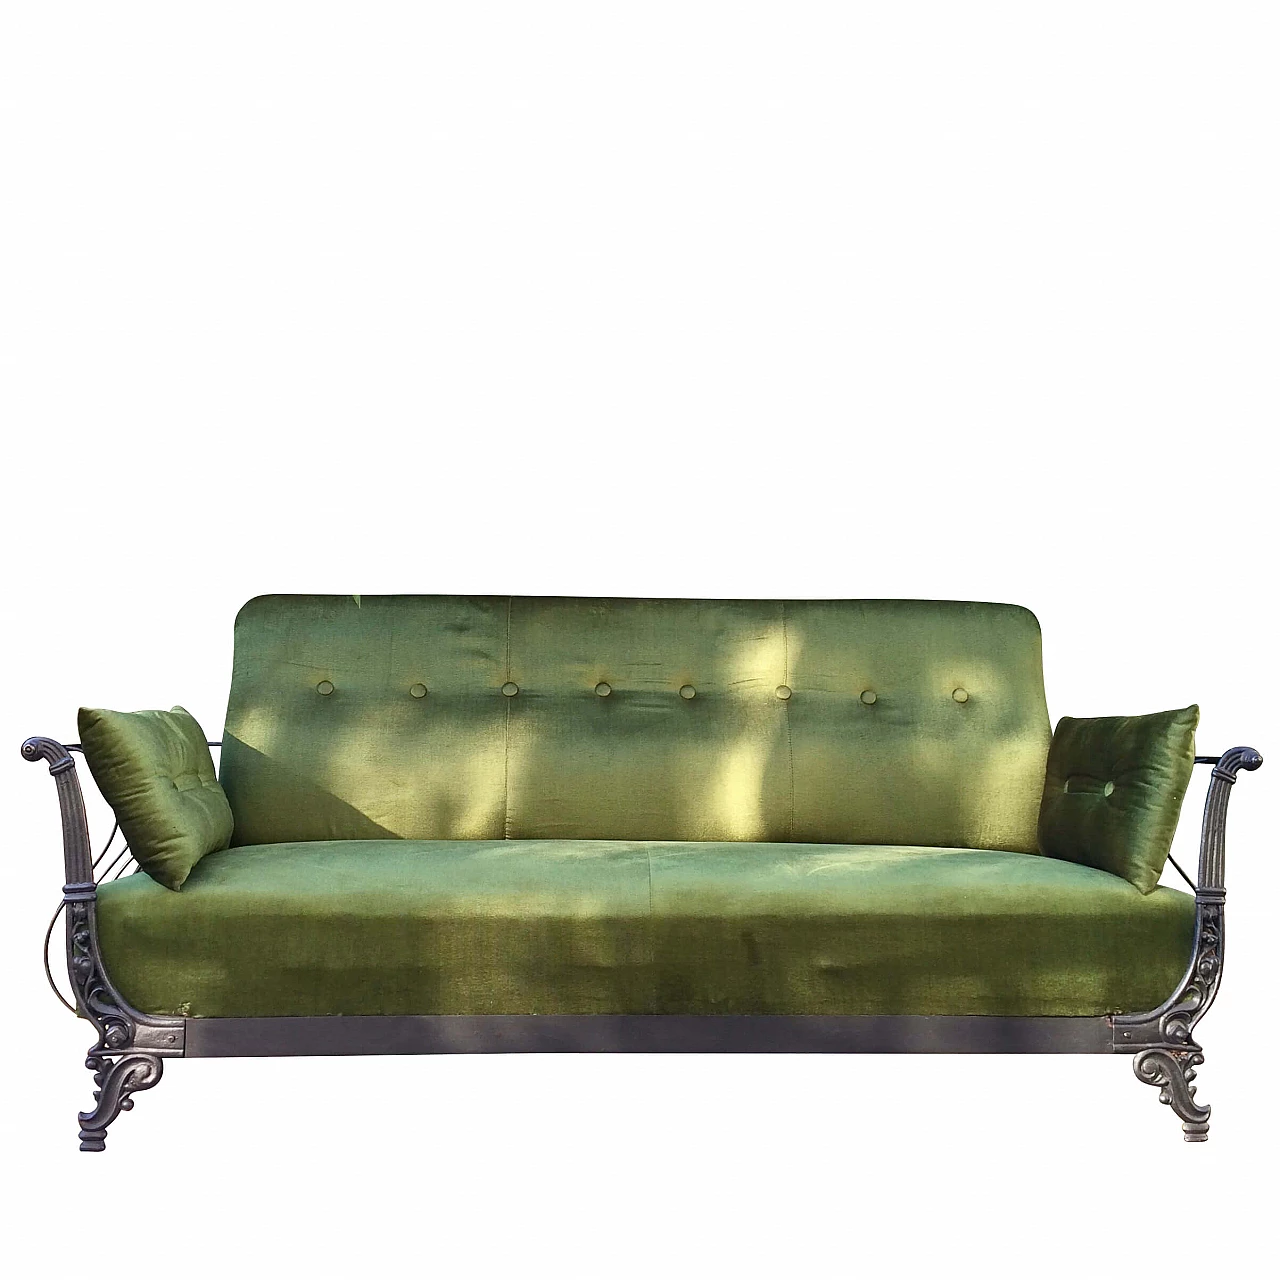 Sofa with iron and cast iron frame, 19th century 1252802